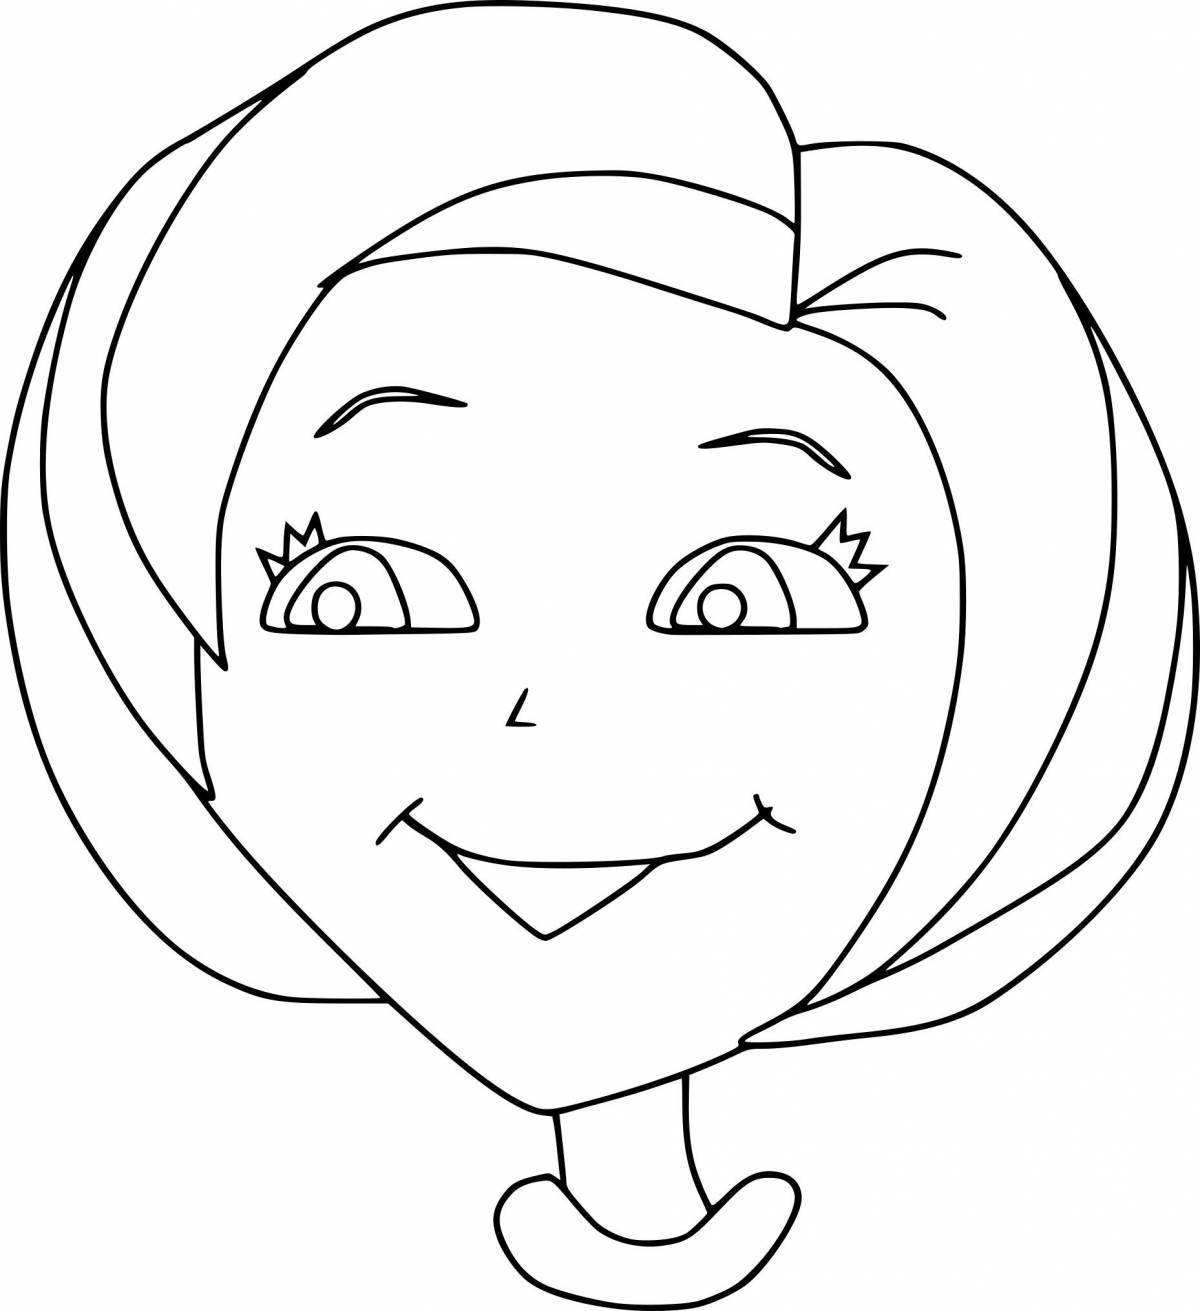 Live face coloring page